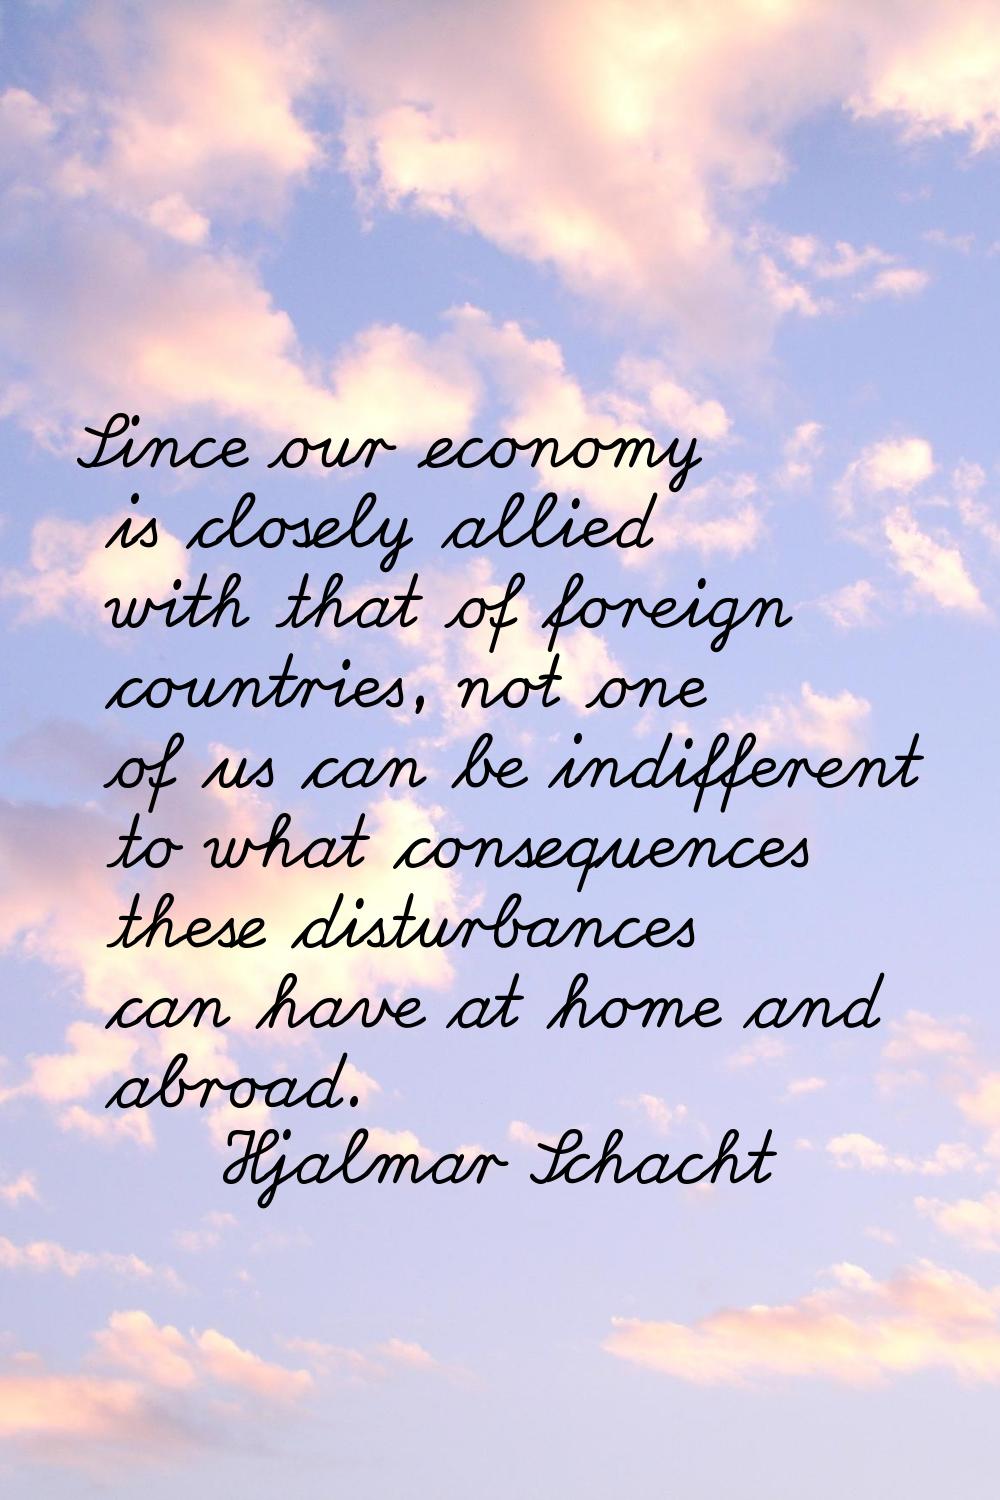 Since our economy is closely allied with that of foreign countries, not one of us can be indifferen